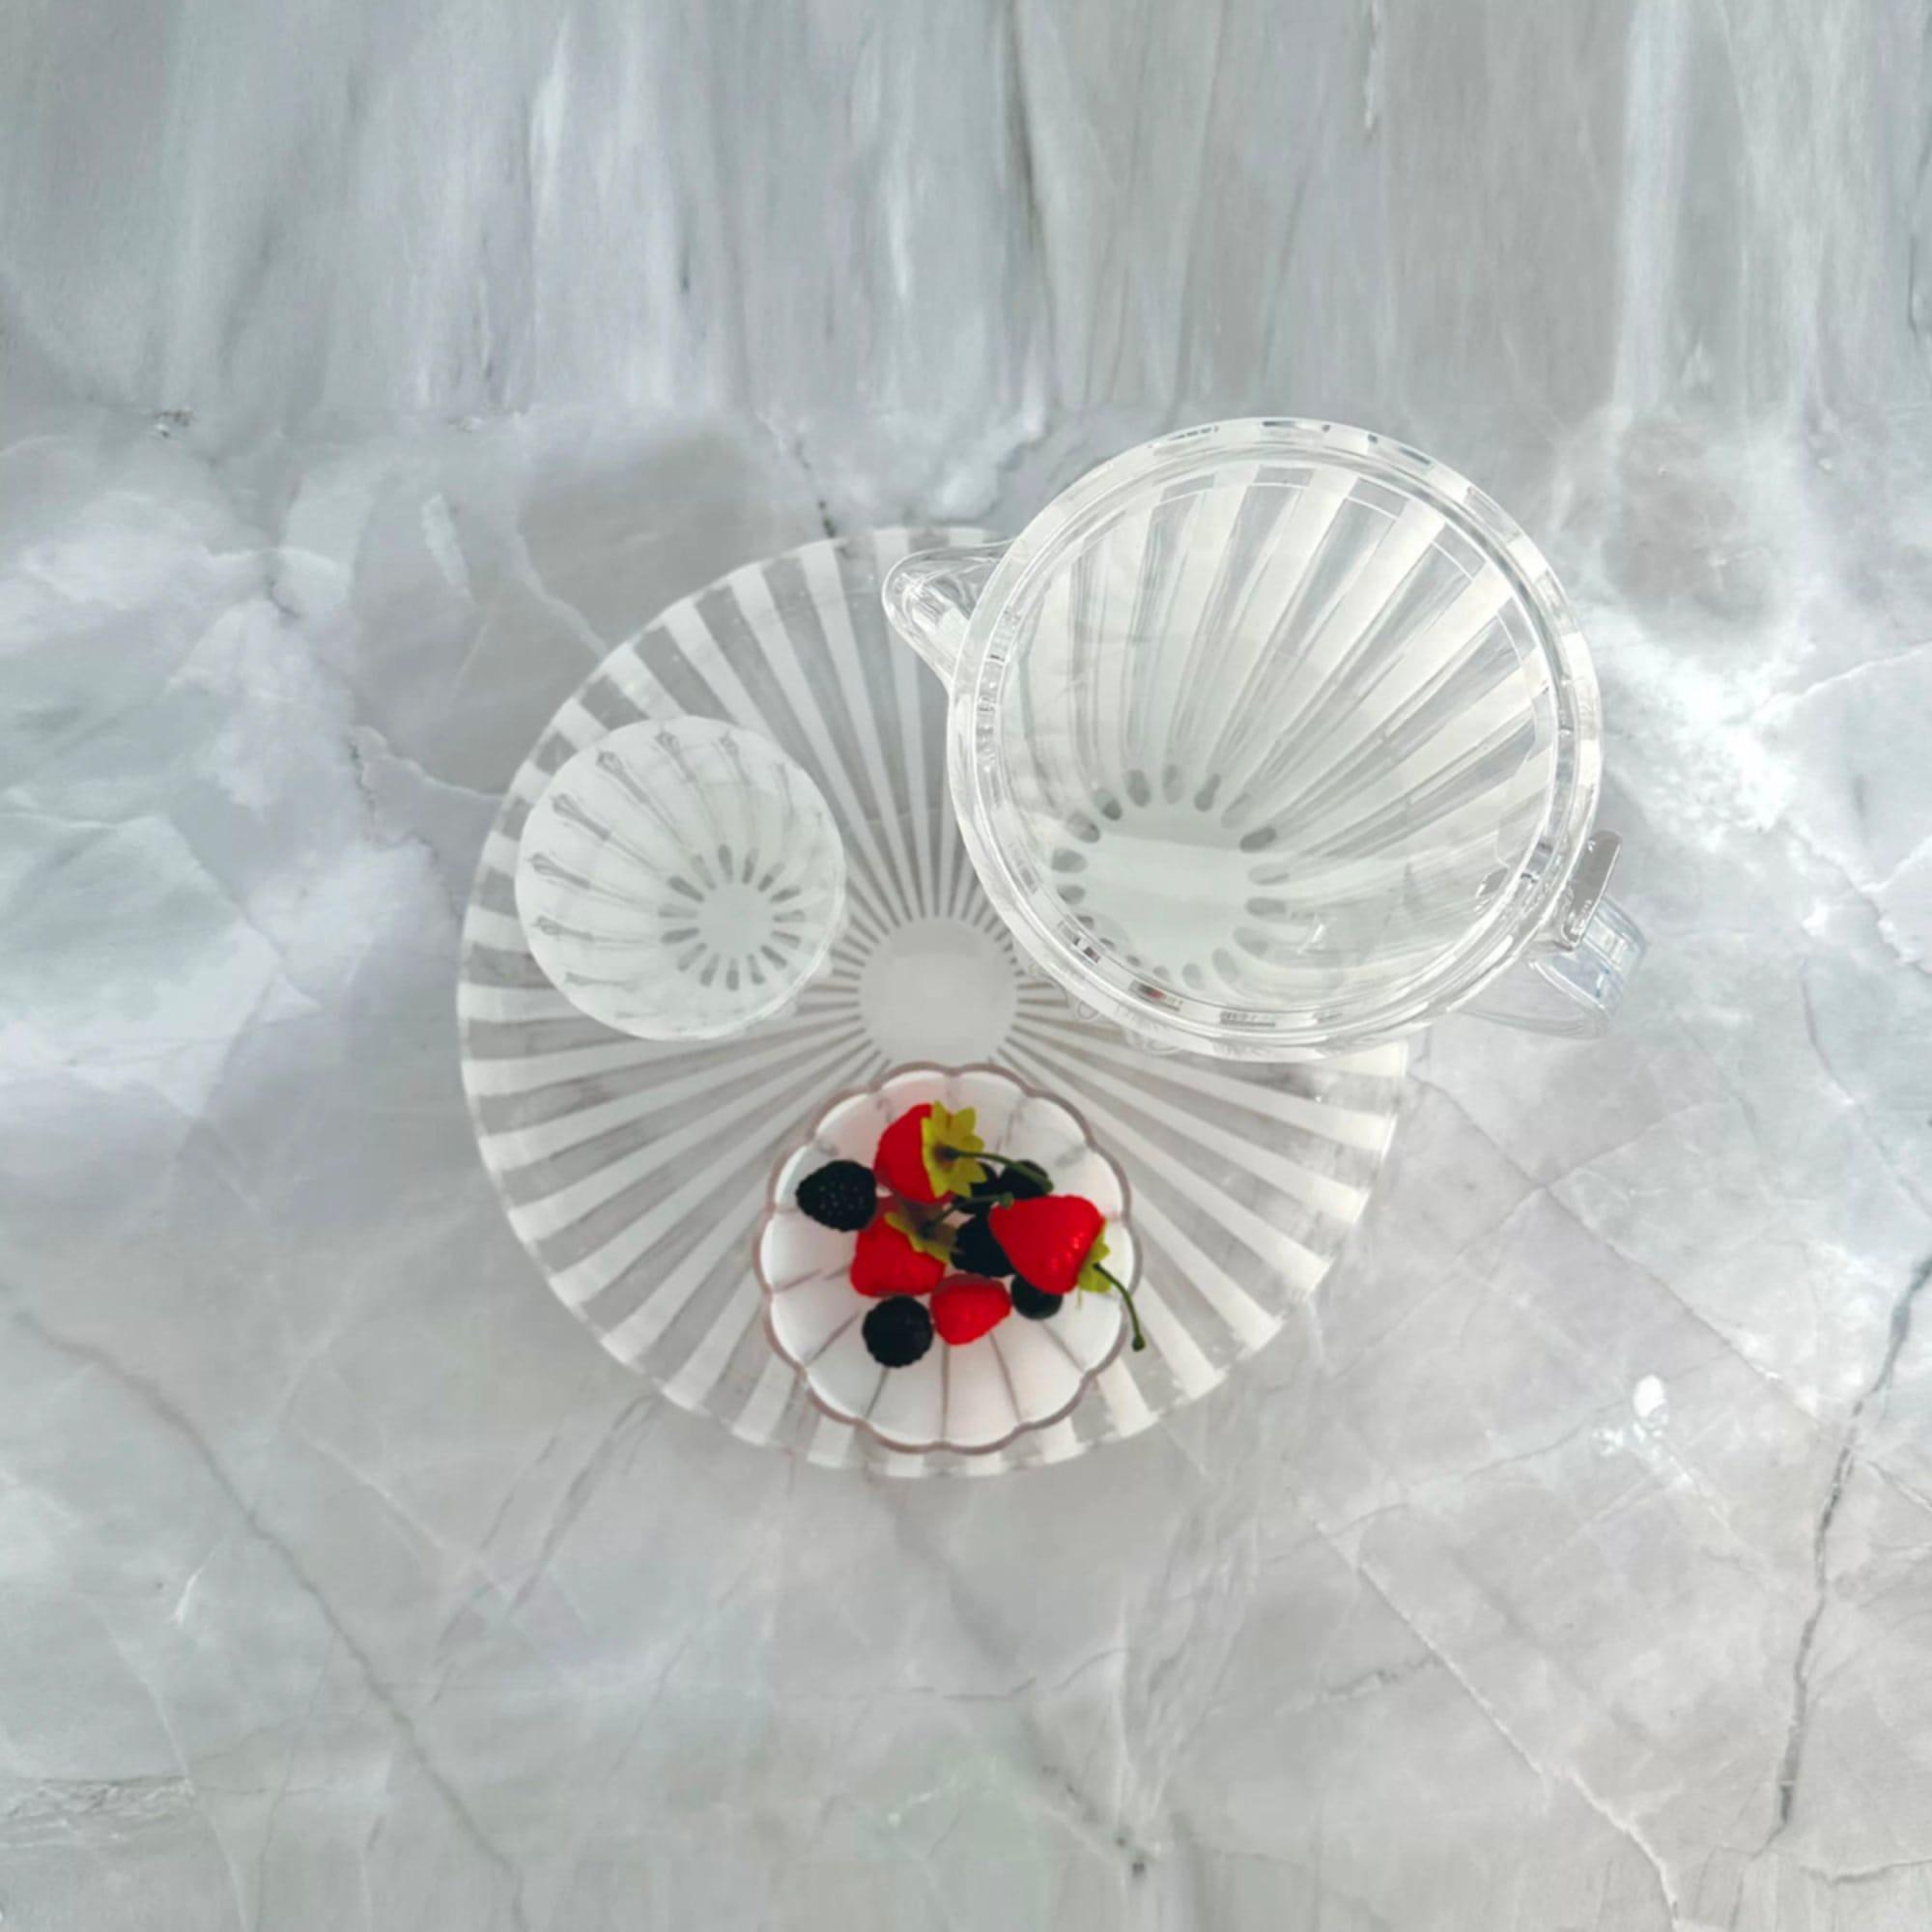 Guzzini Dolcevita Round Serving Tray 31cm Mother of Pearl Image 3